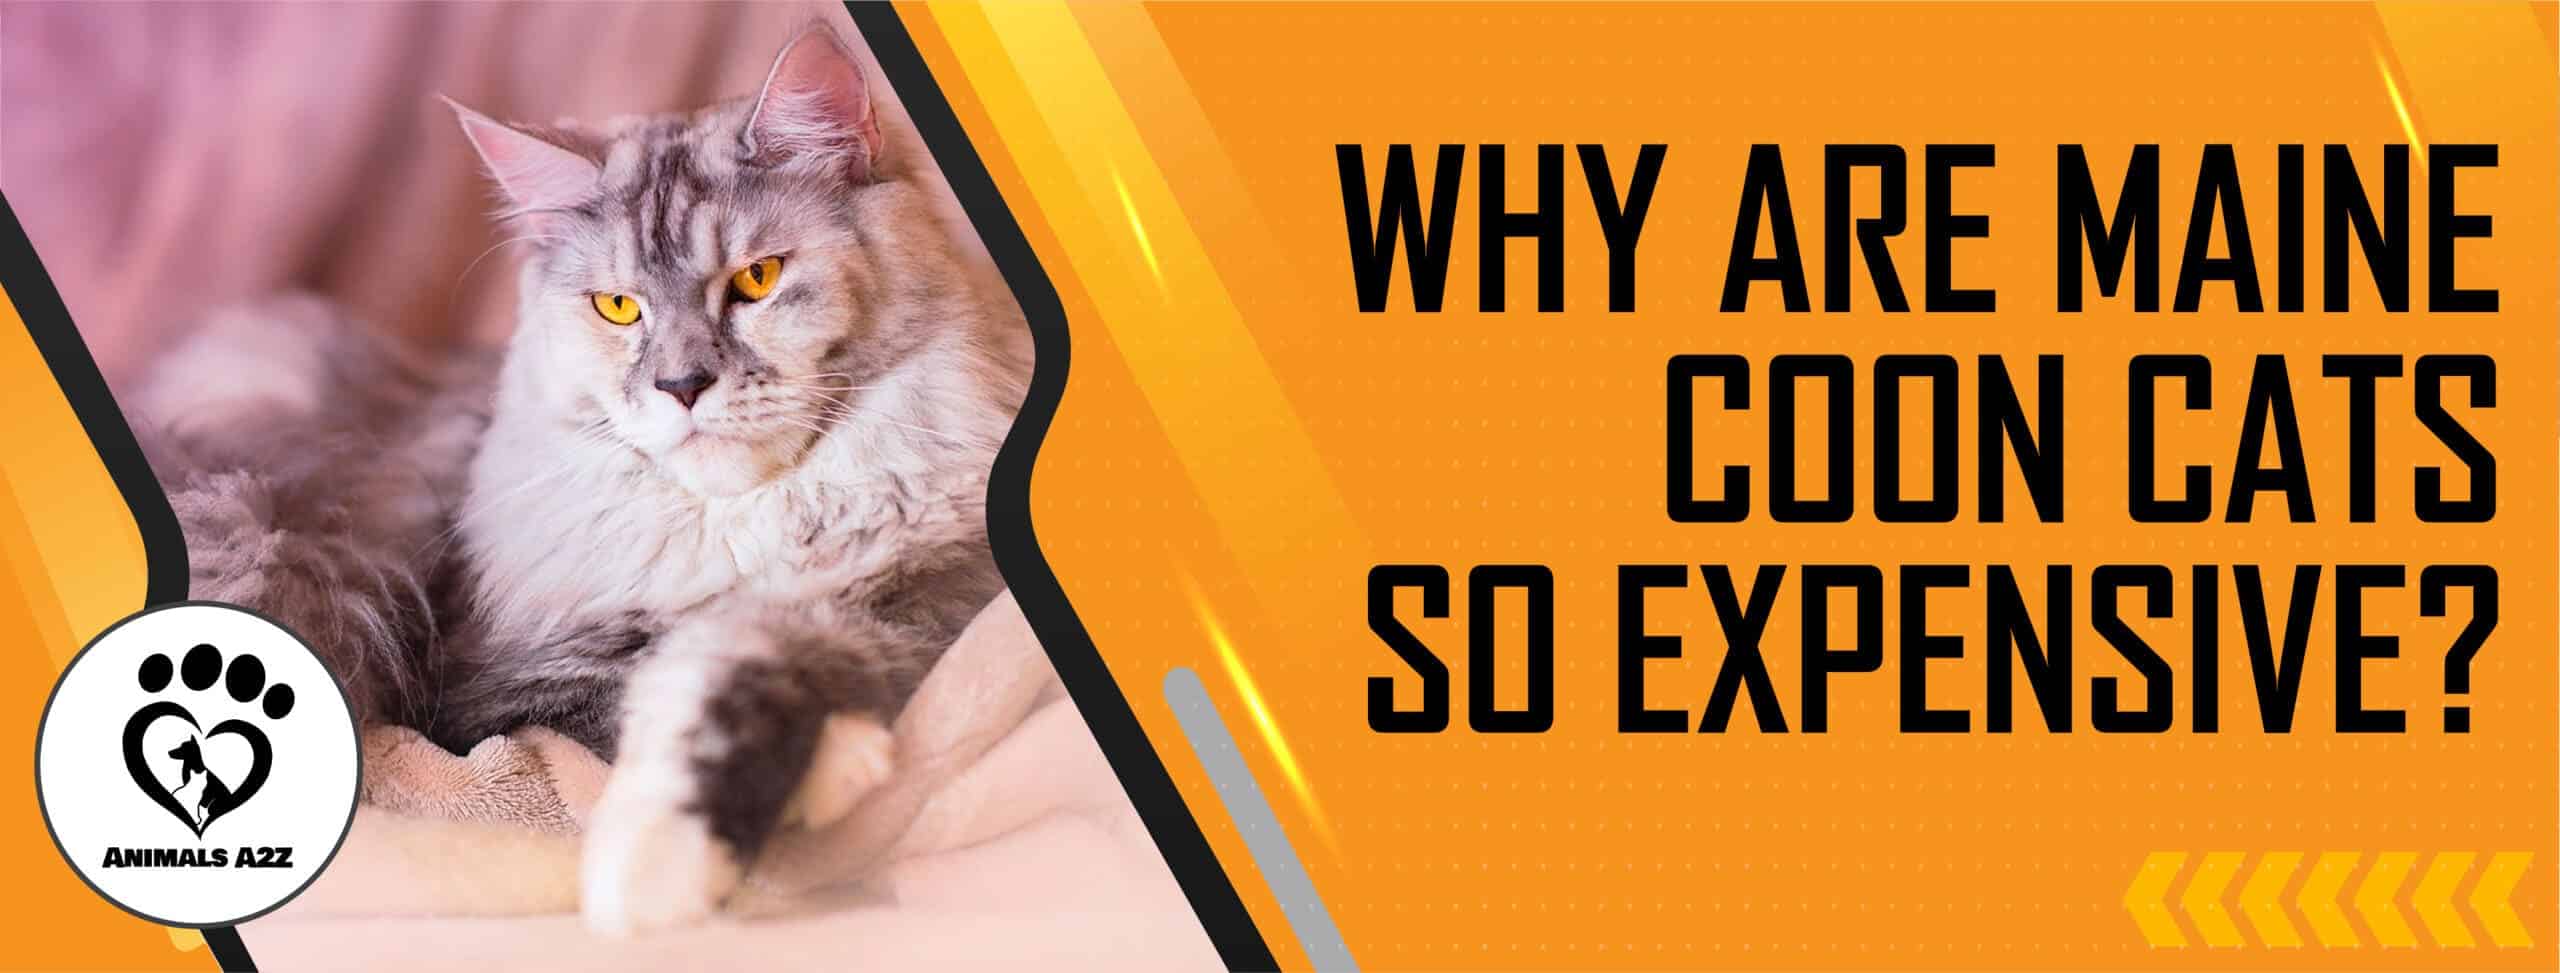 Why are Maine Coon cats so expensive? [ Detailed Answer ]